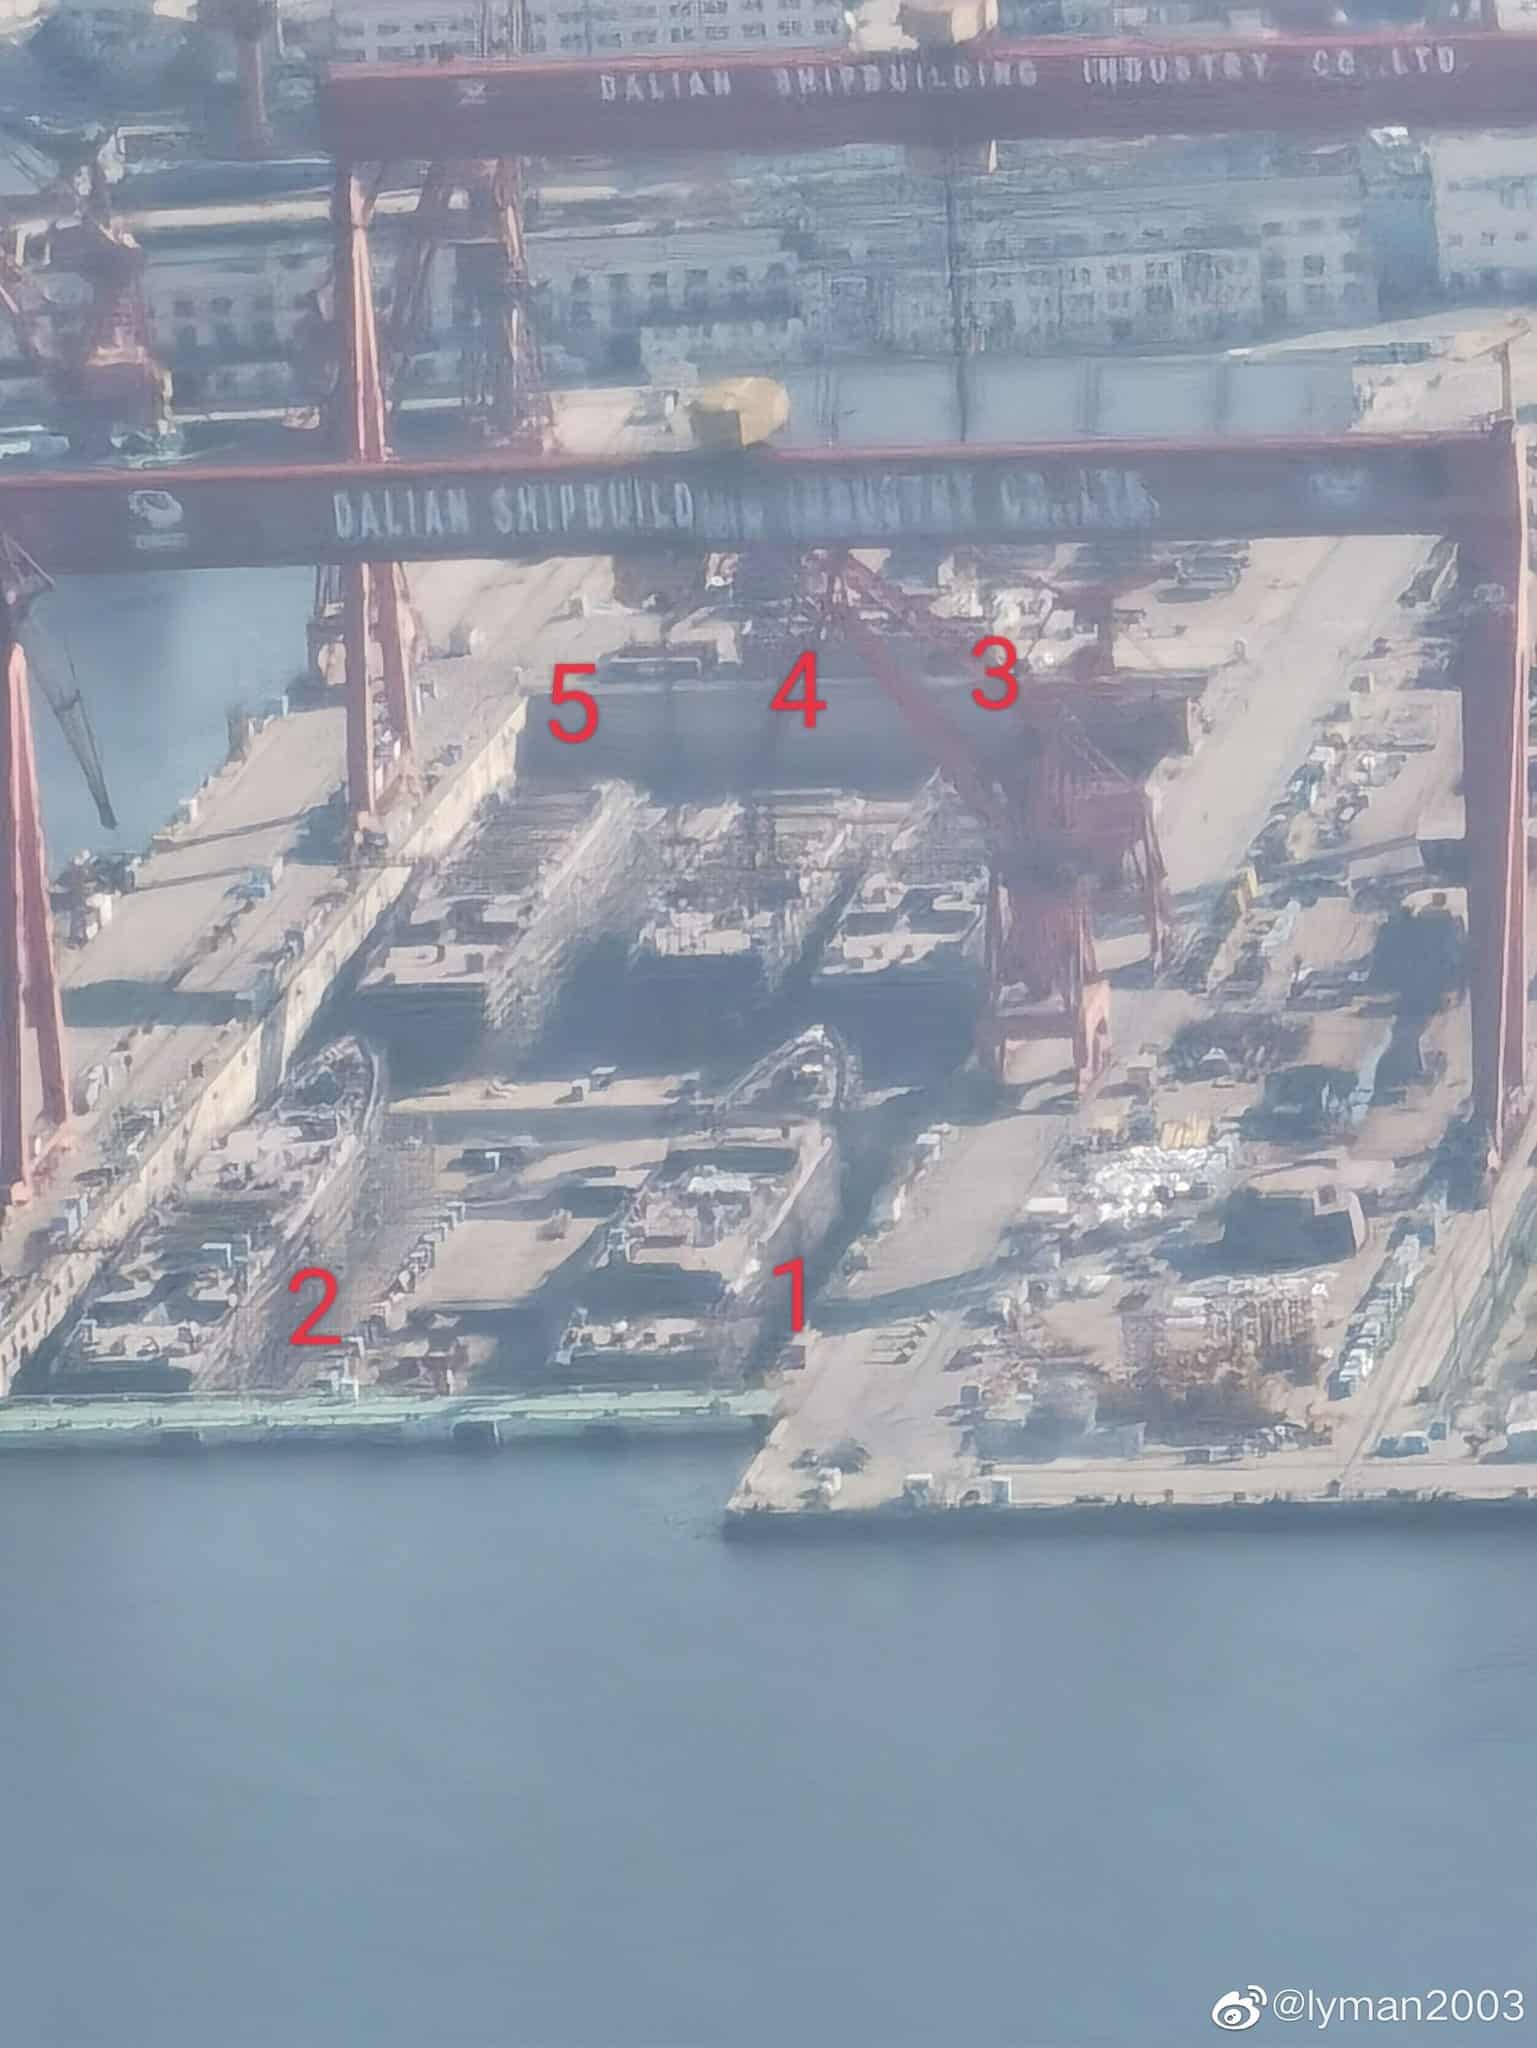 Five-Type-052D-Destroyers-Under-Construction-in-China (1).jpg